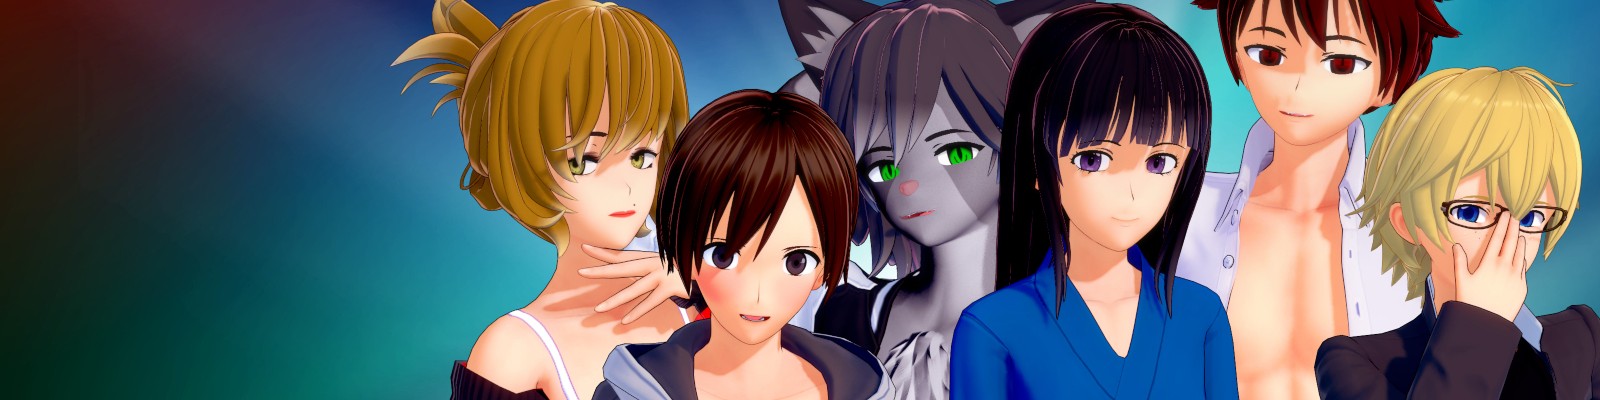 Salvation In Nightmare Adult Game Android Apk Download (8)